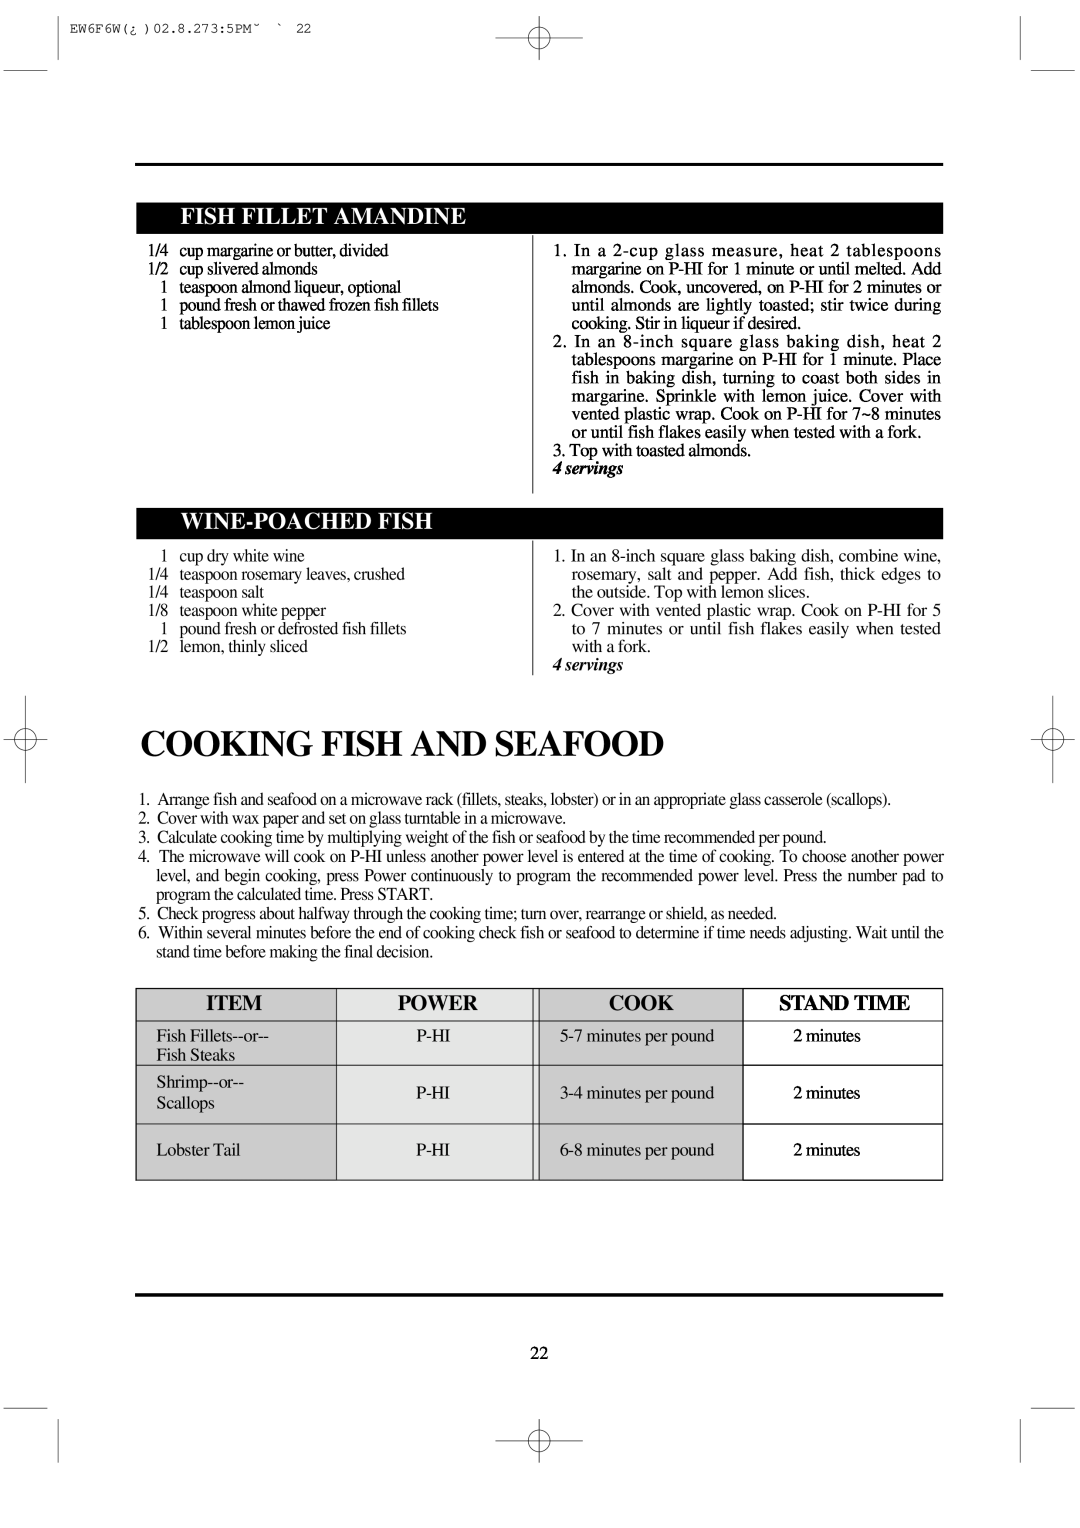 Daewoo EW6F6W Cooking Fish And Seafood, Fish Fillet Amandine, Wine-Poachedfish, Power, Stand Time, servings 